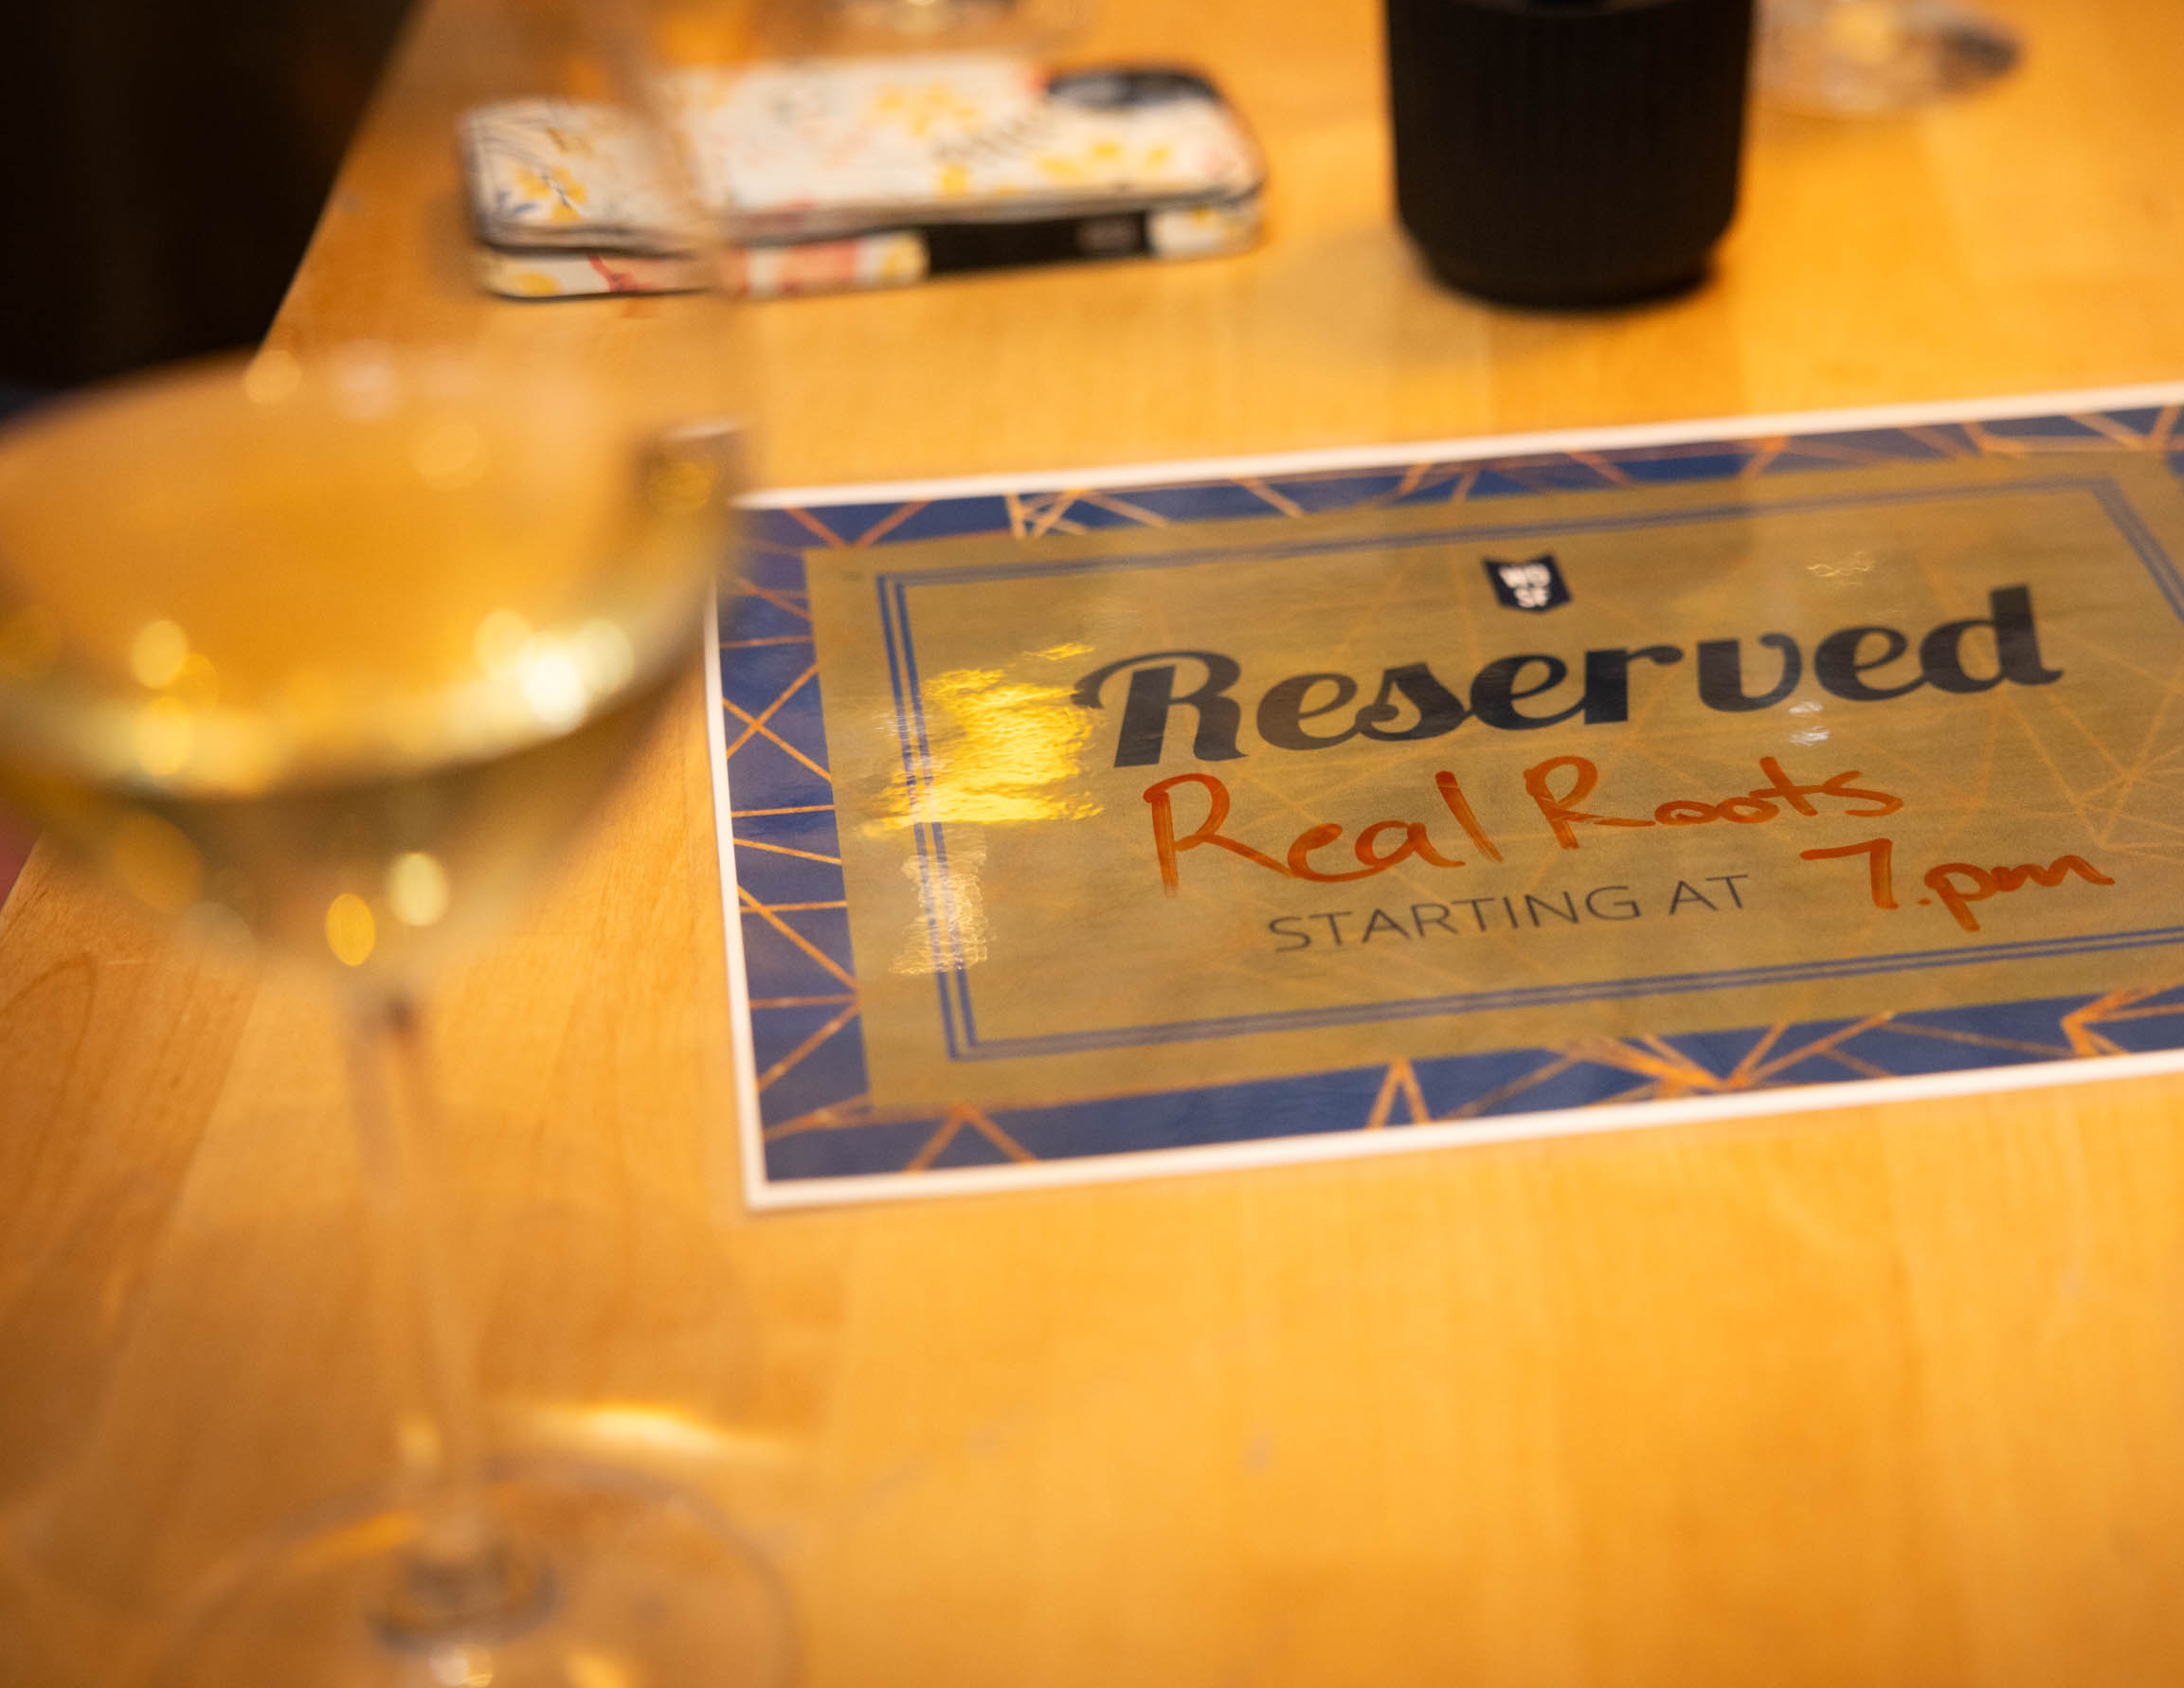 A tight photo of a piece of paper that reads &quot;Reserved Real Roots Starting at 7pm&quot; with an out of focus glass of wine in the foreground.